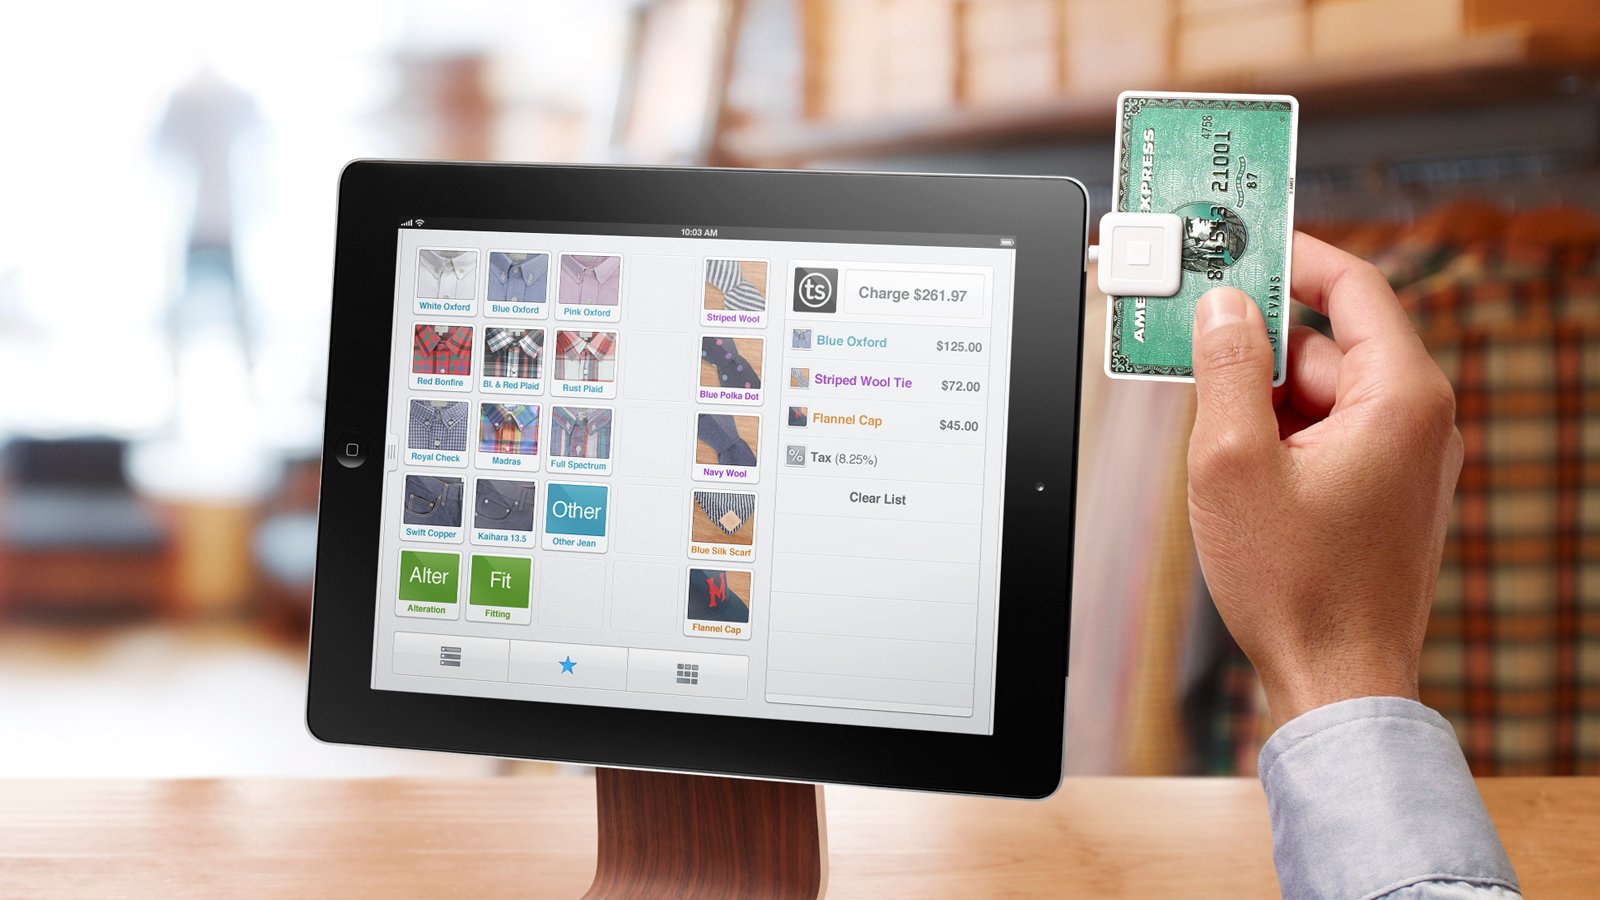 Replace your cash register with Square Register app for iPad | iMore